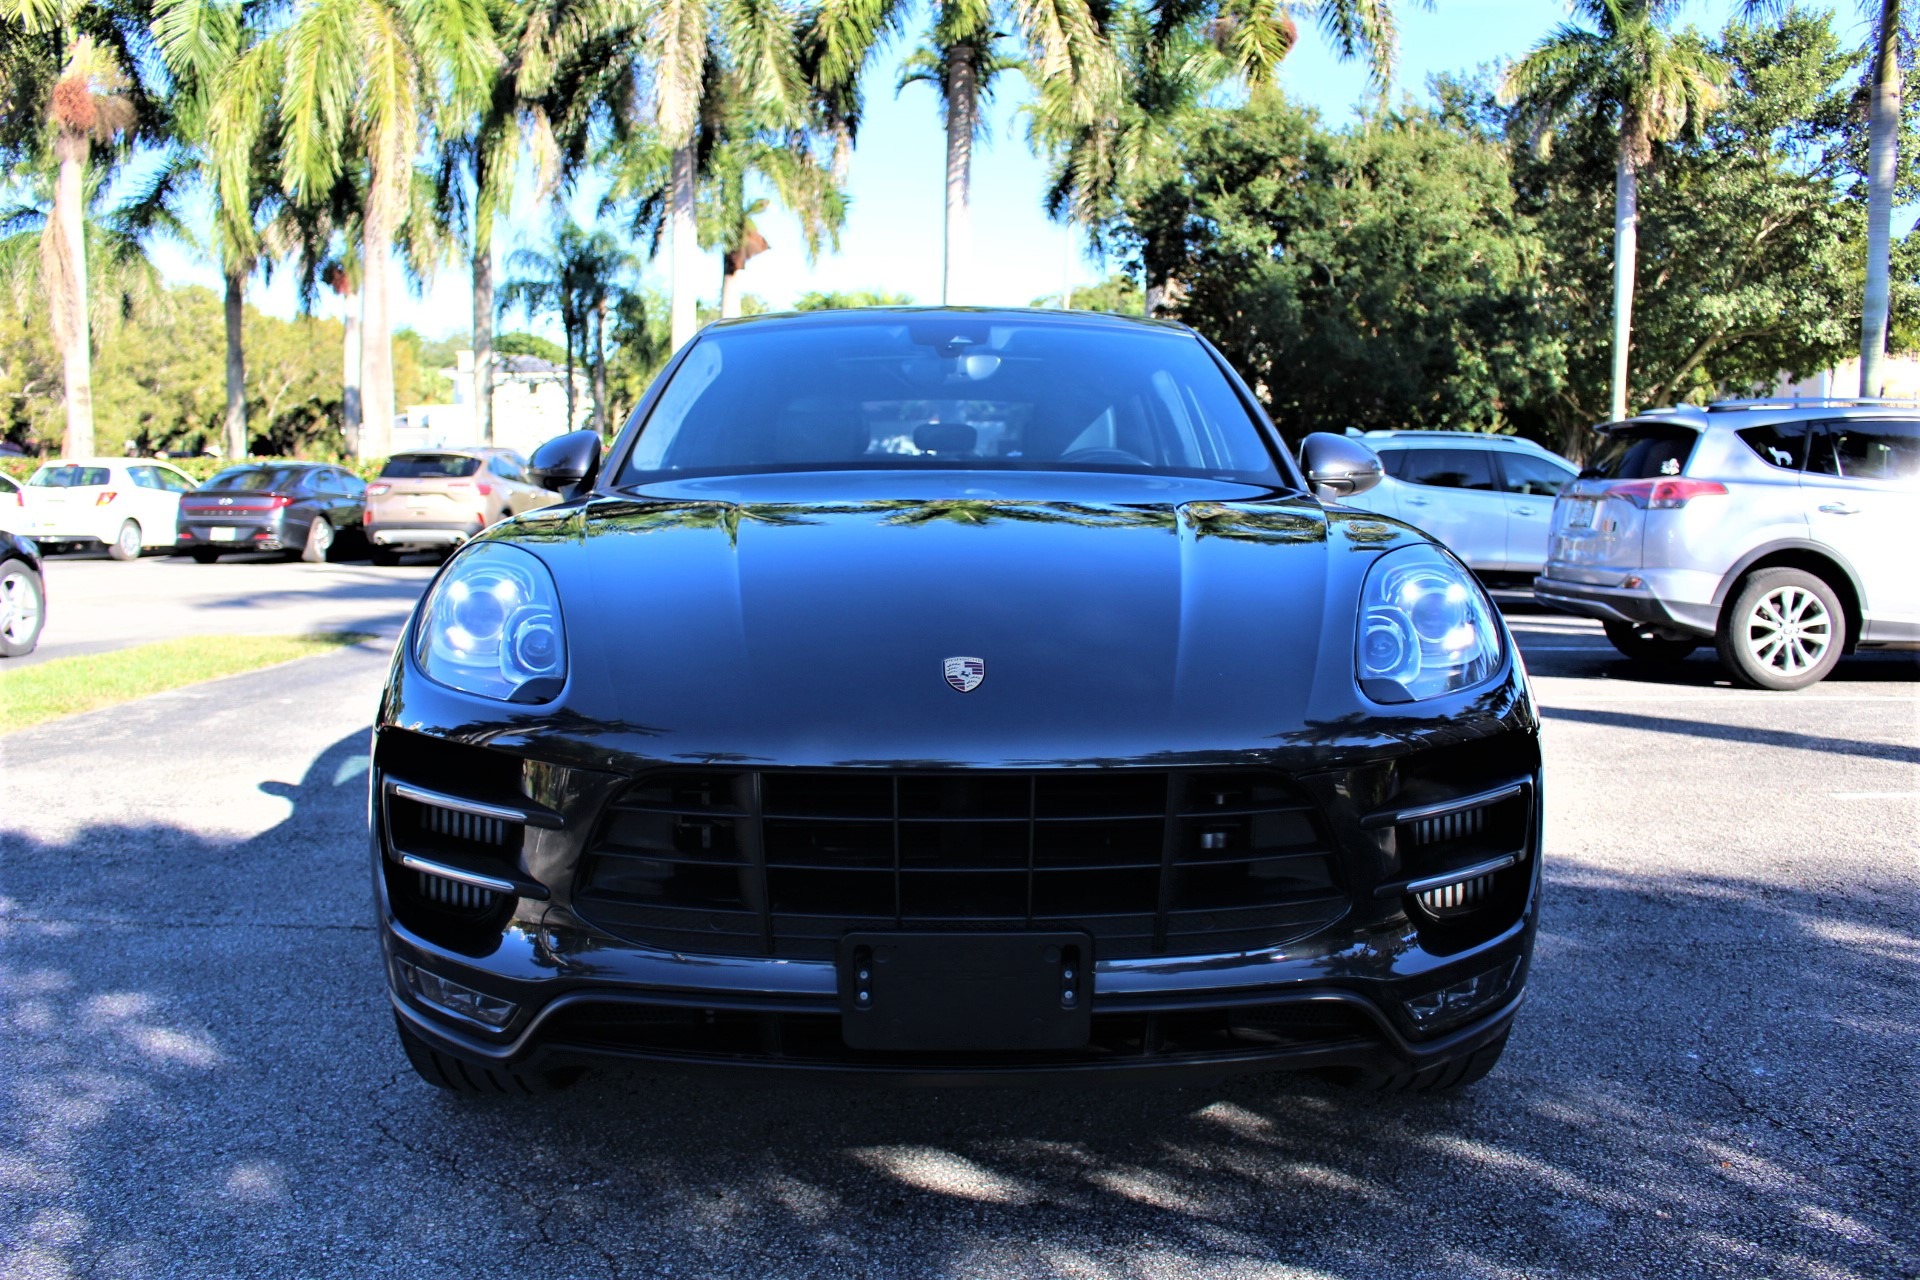 Used 2017 Porsche Macan Turbo for sale Sold at The Gables Sports Cars in Miami FL 33146 3